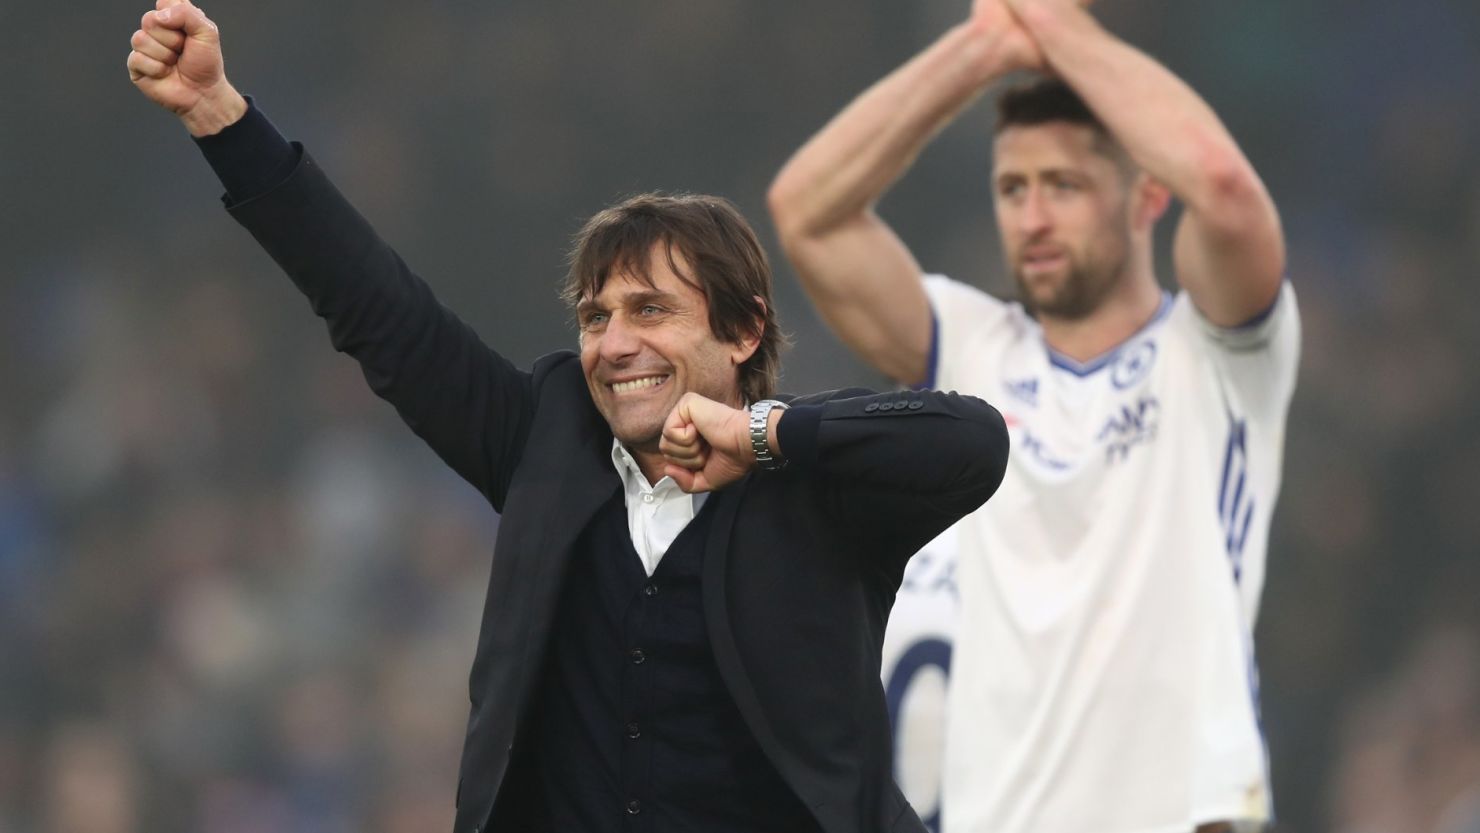 Antonio Conte celebrates his side's club record-equaling 11th straight EPL win after beating Crystal Palace at Selhust Park.